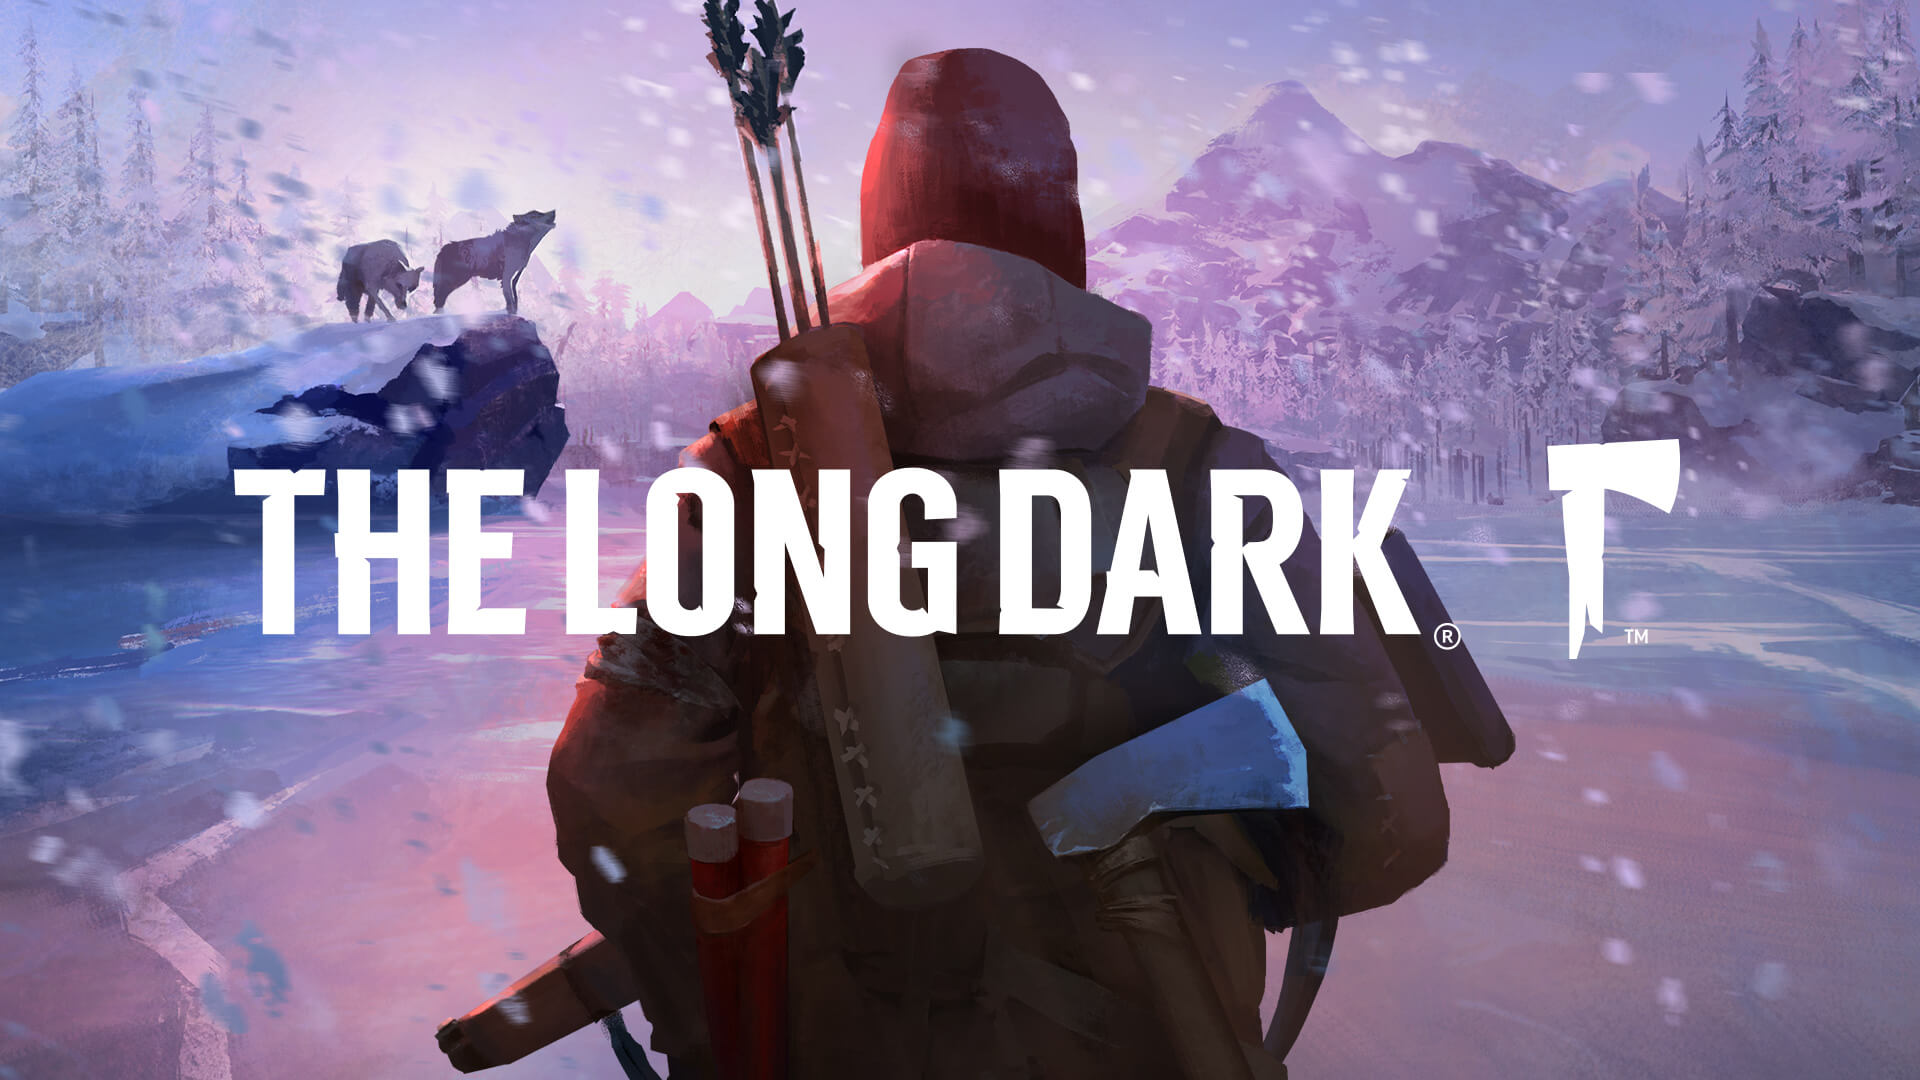 THE LONG DARK PS4 Version Full Game Free Download